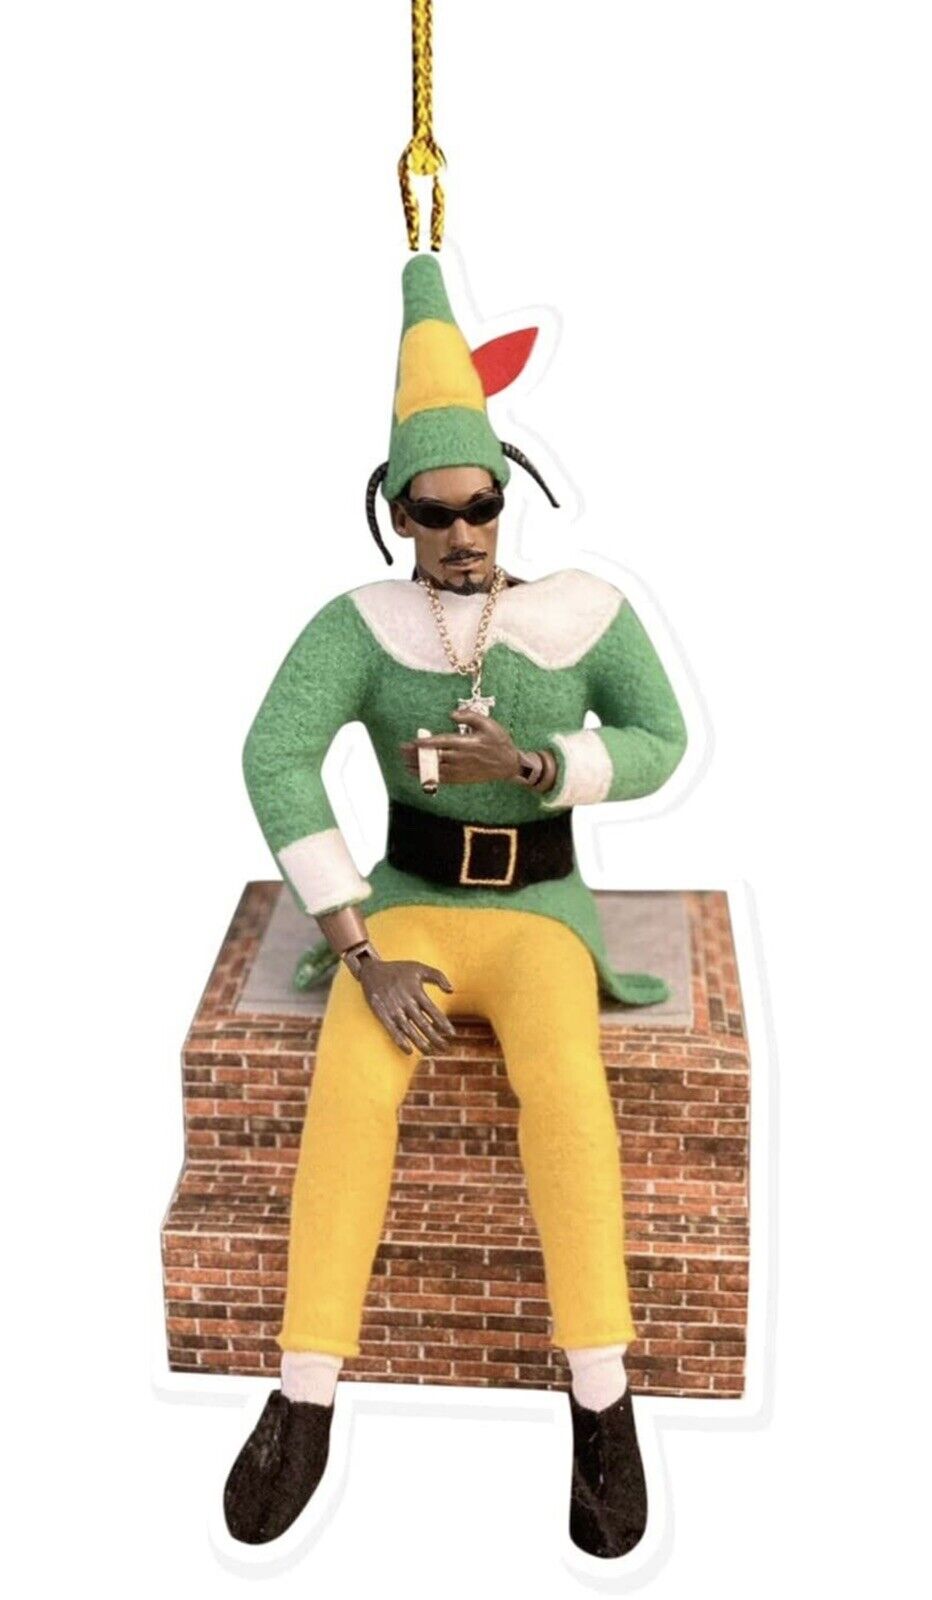 New Rapper Snoop Dogg Holiday Ornament Decoration 